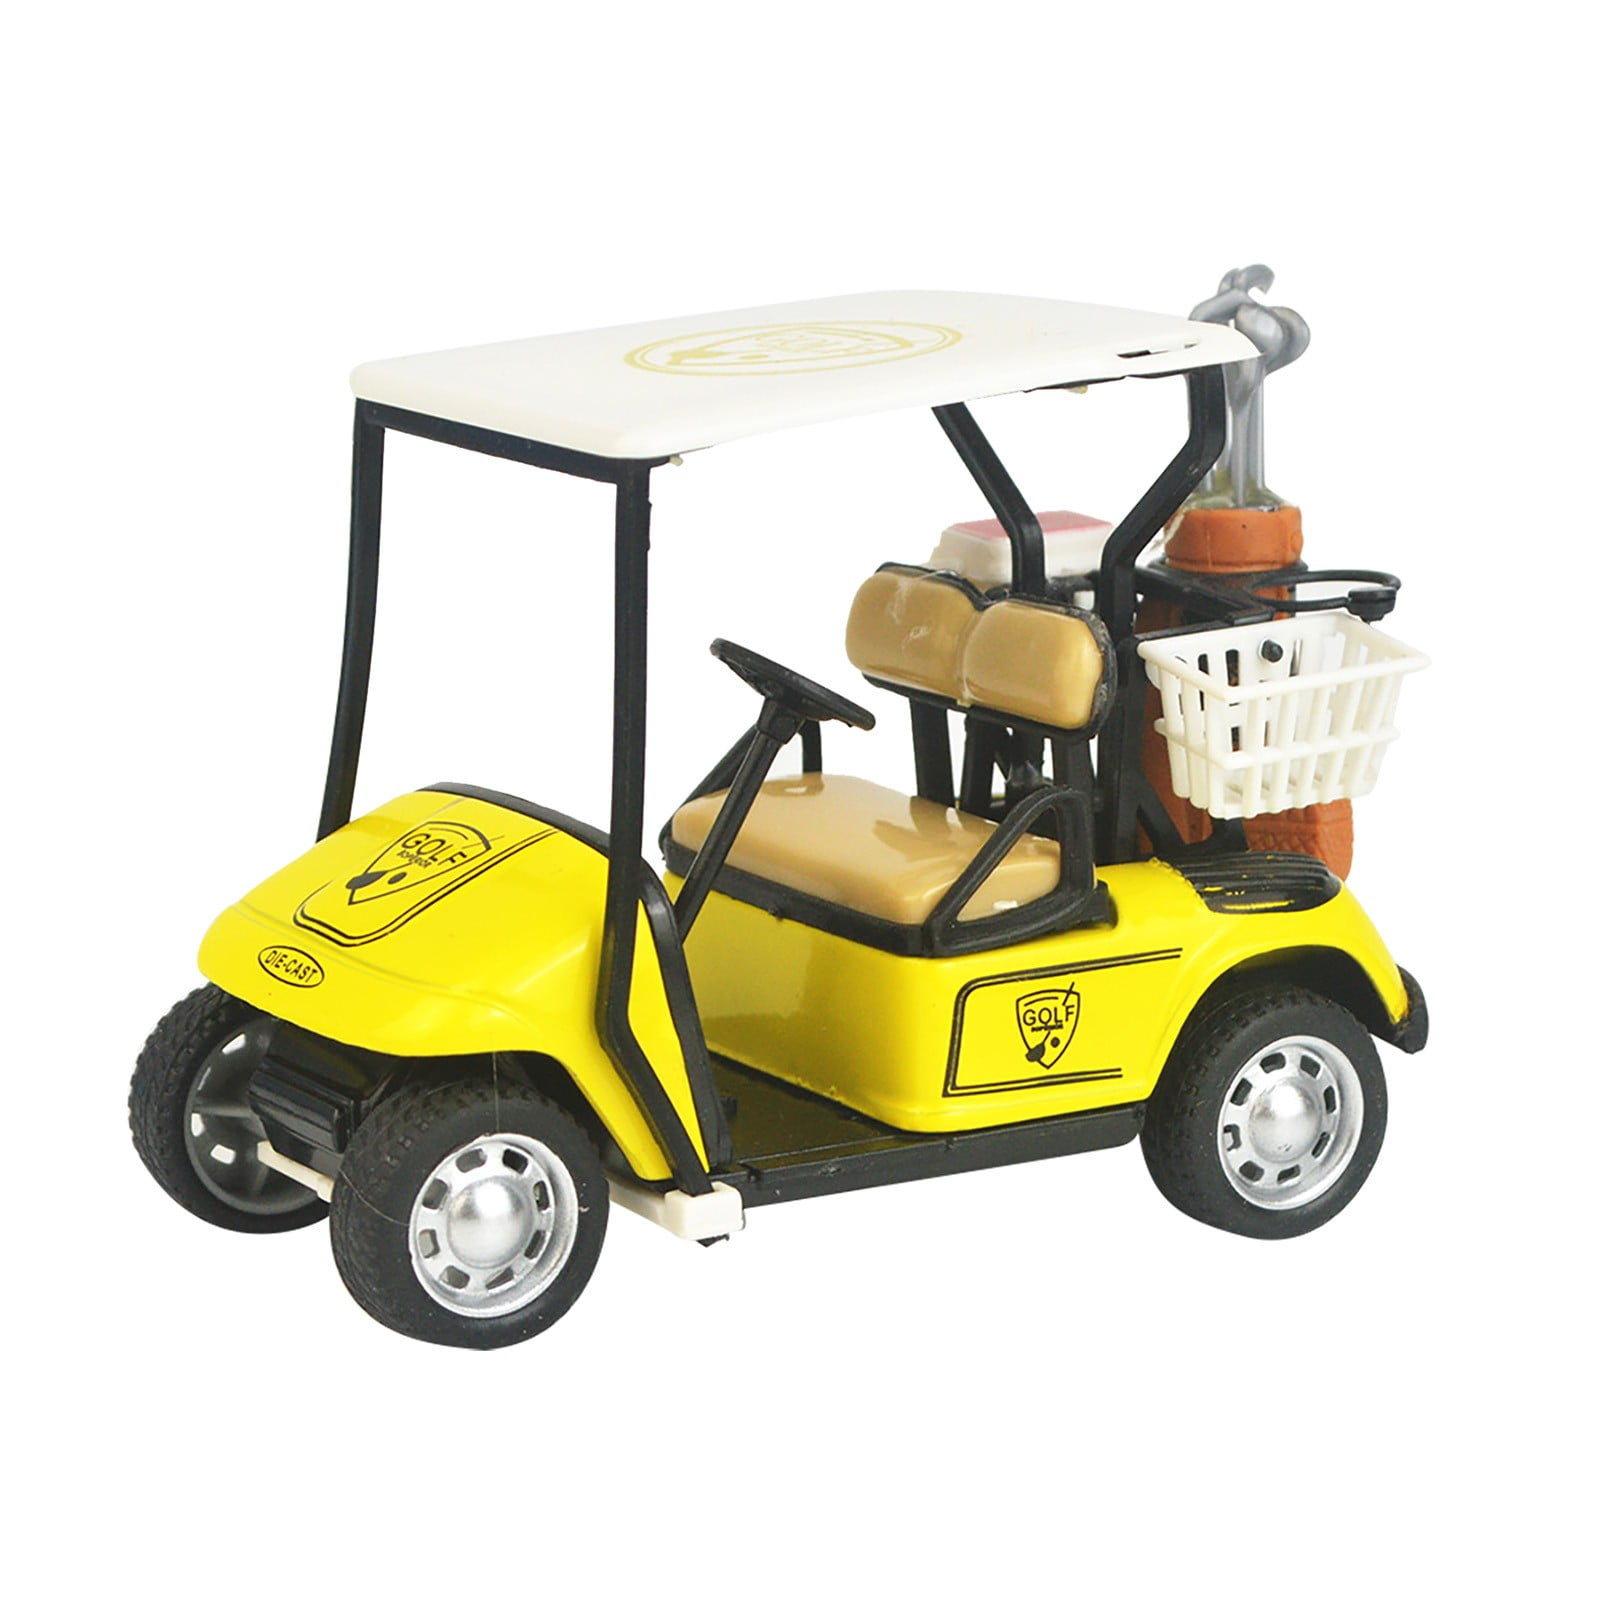 Die-cast Metal Golf Cart Model Toy Removable Cue 1:36 Scale Vehicle 4.5  Inches 